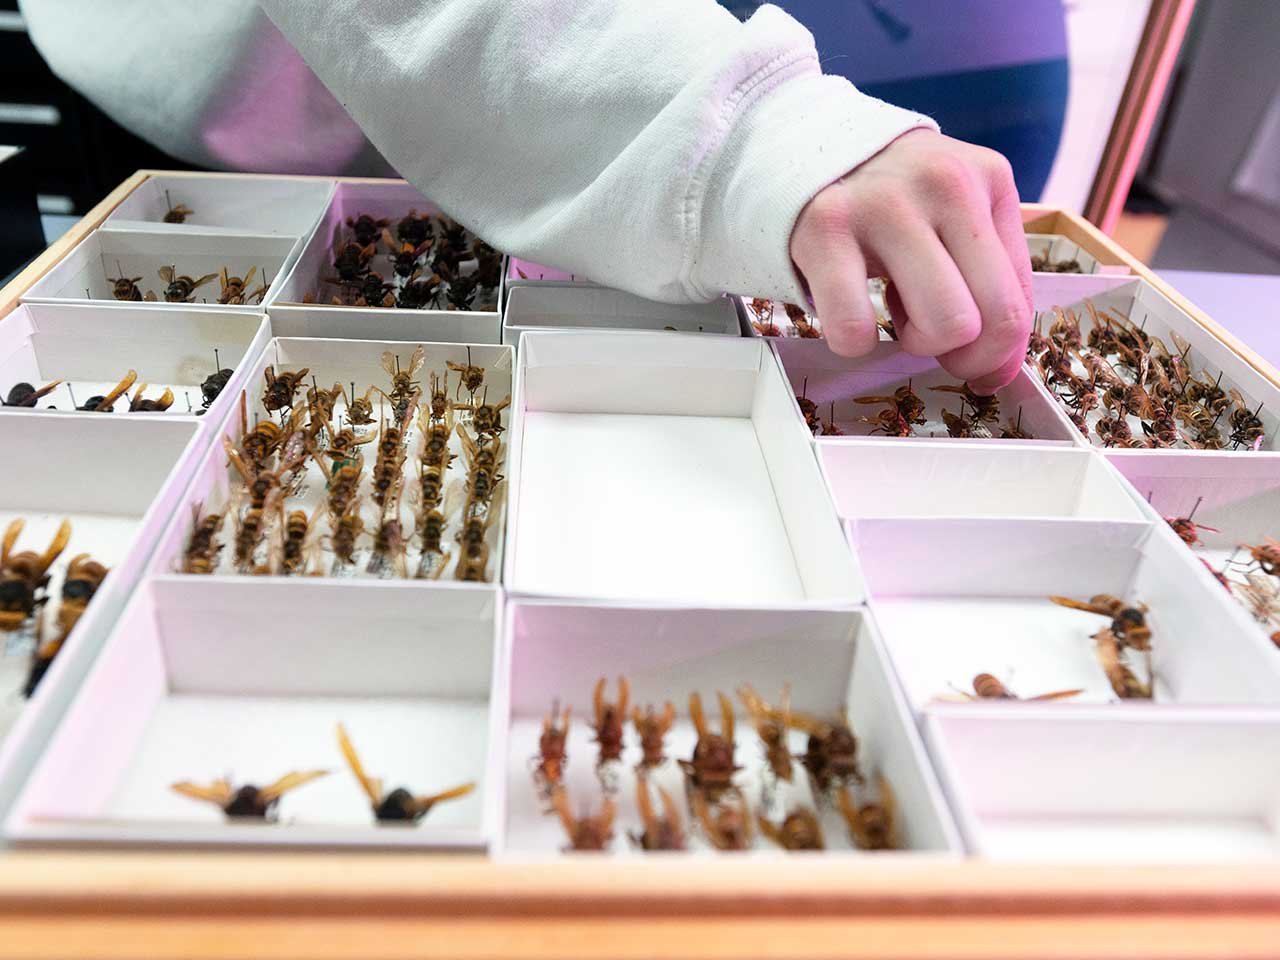 A grad student grabs pinned killer hornets from their white display boxes to move them.